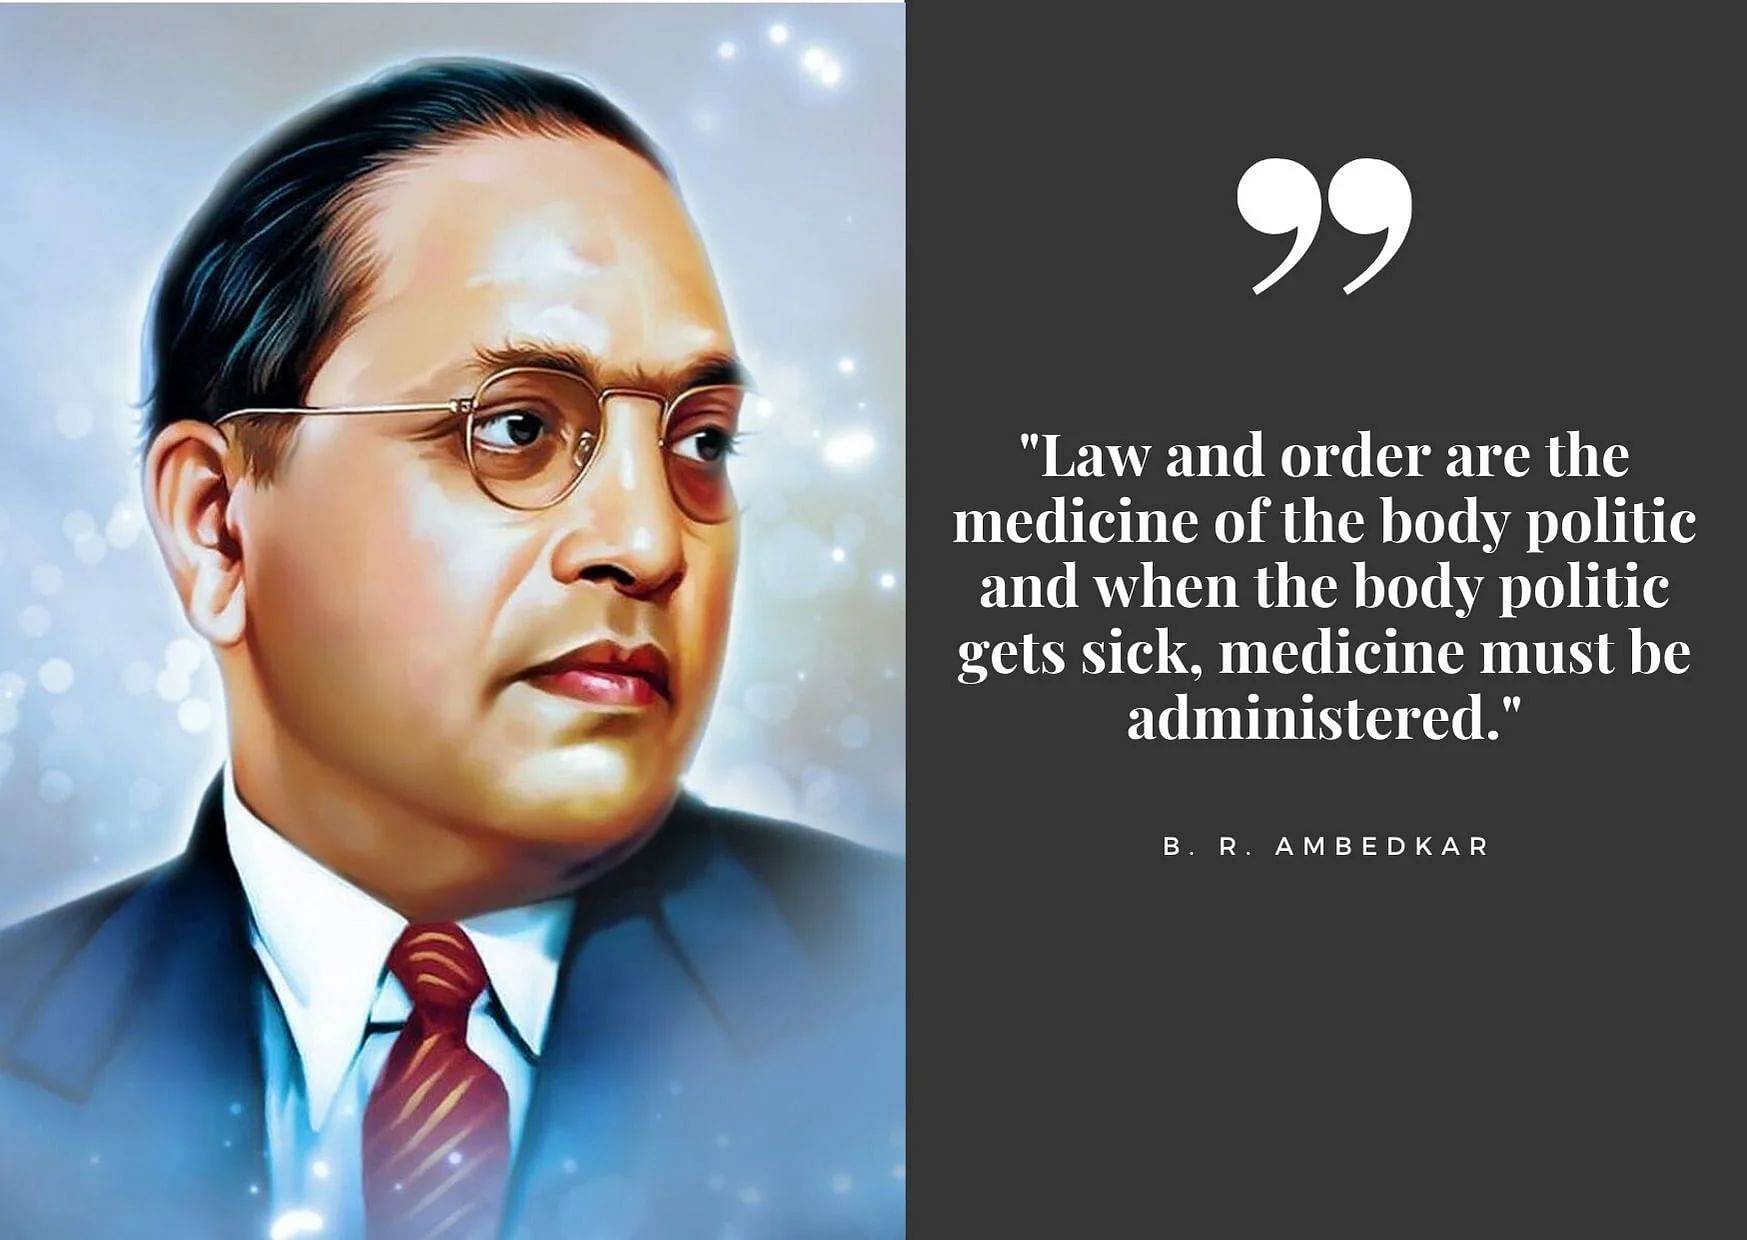 Ambedkar Jayanti 2020 Quotes, Image, and Messages in English: Dr. Bhim Rao Ambedkar's birth anniversary will be celebrated on Tuesday 14 April